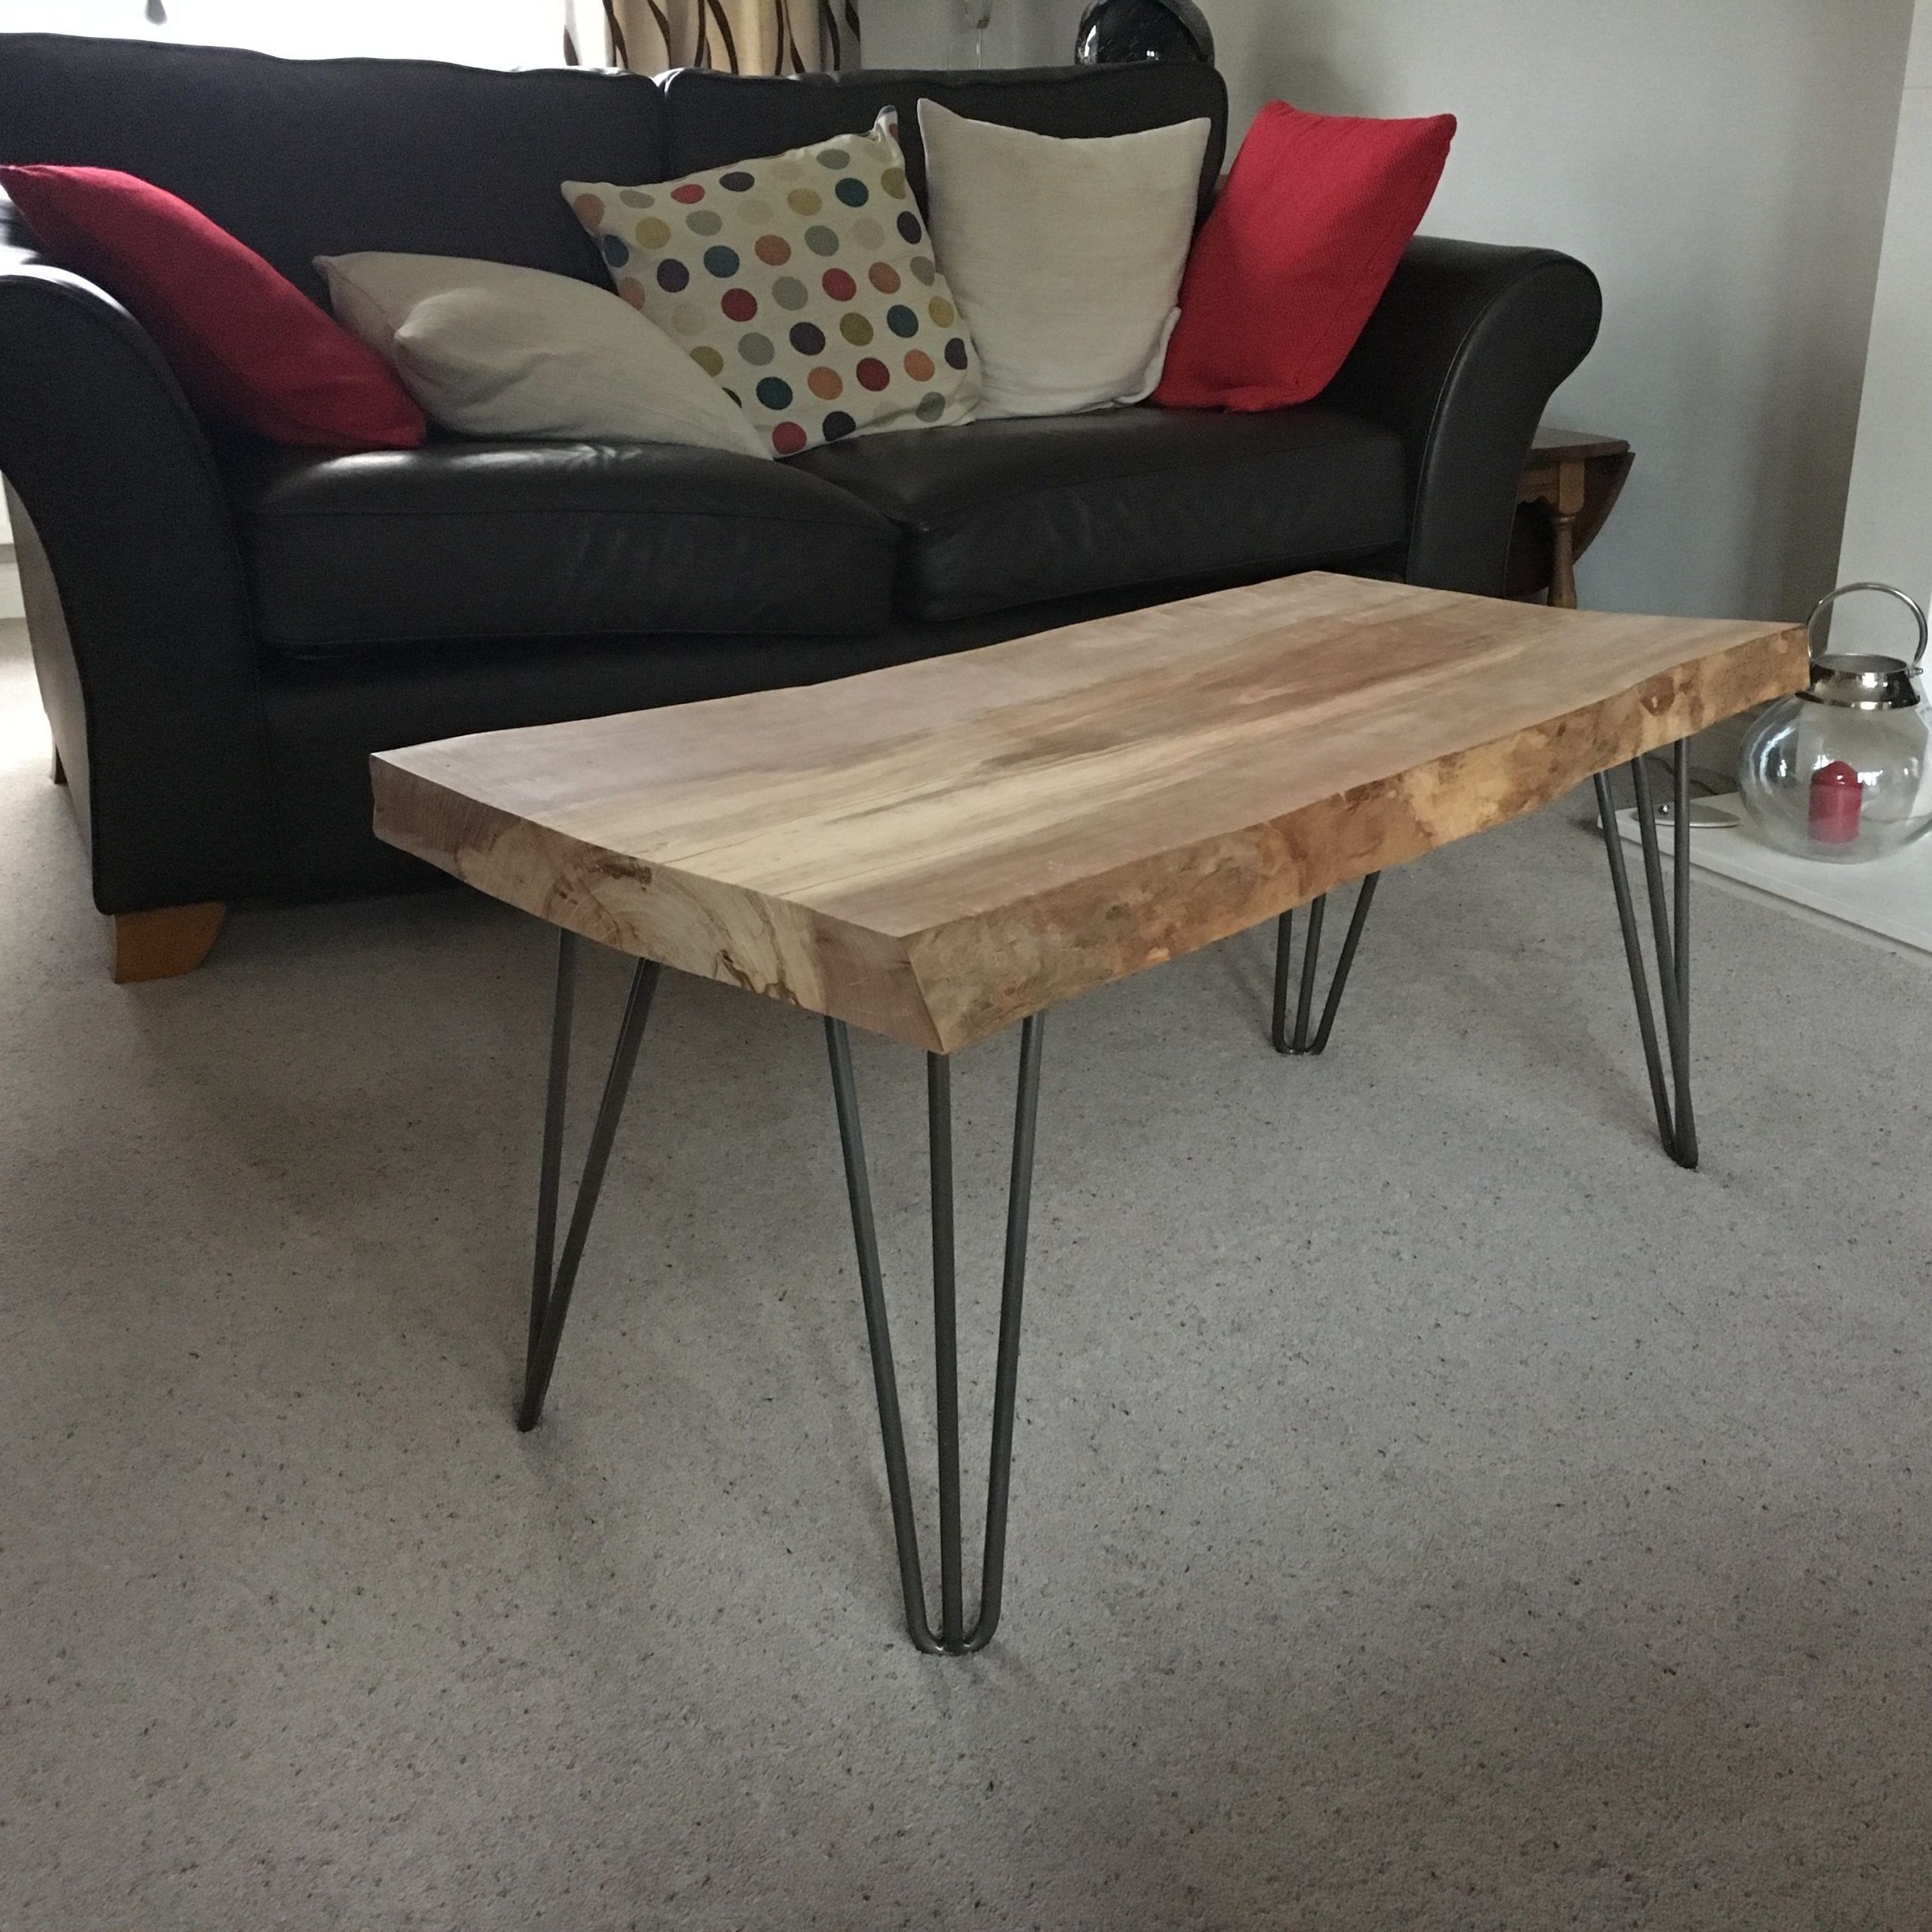 A Unique Coffee Table Made With A Solid Oak Block Of Wood, Hairpin Within 2020 Metal And Oak Coffee Tables (View 6 of 10)